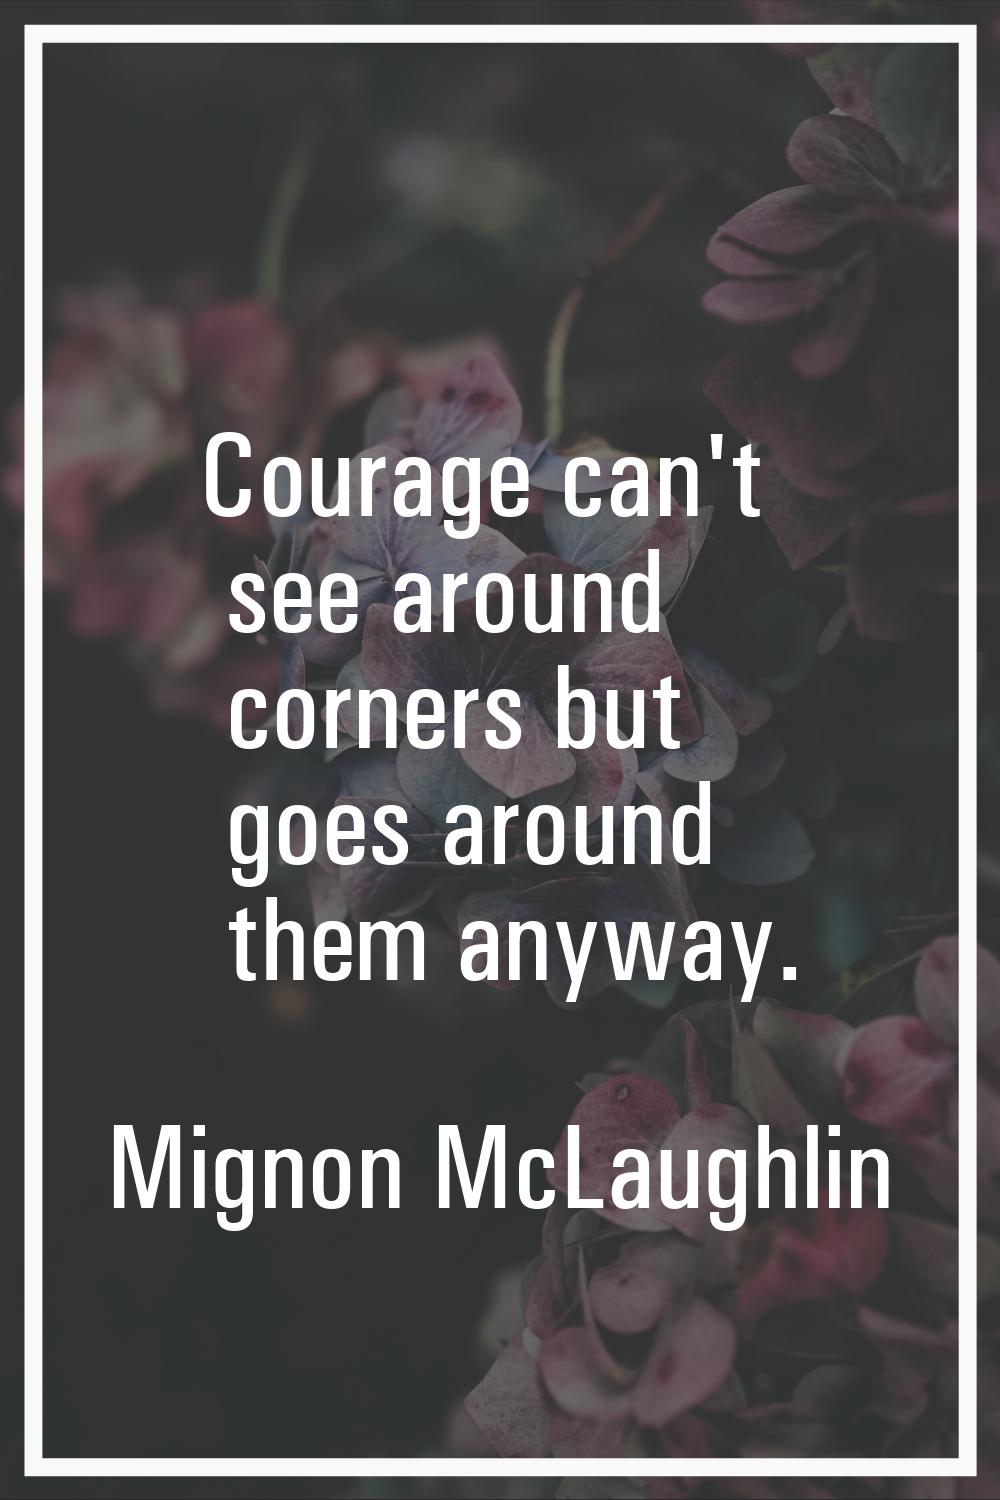 Courage can't see around corners but goes around them anyway.